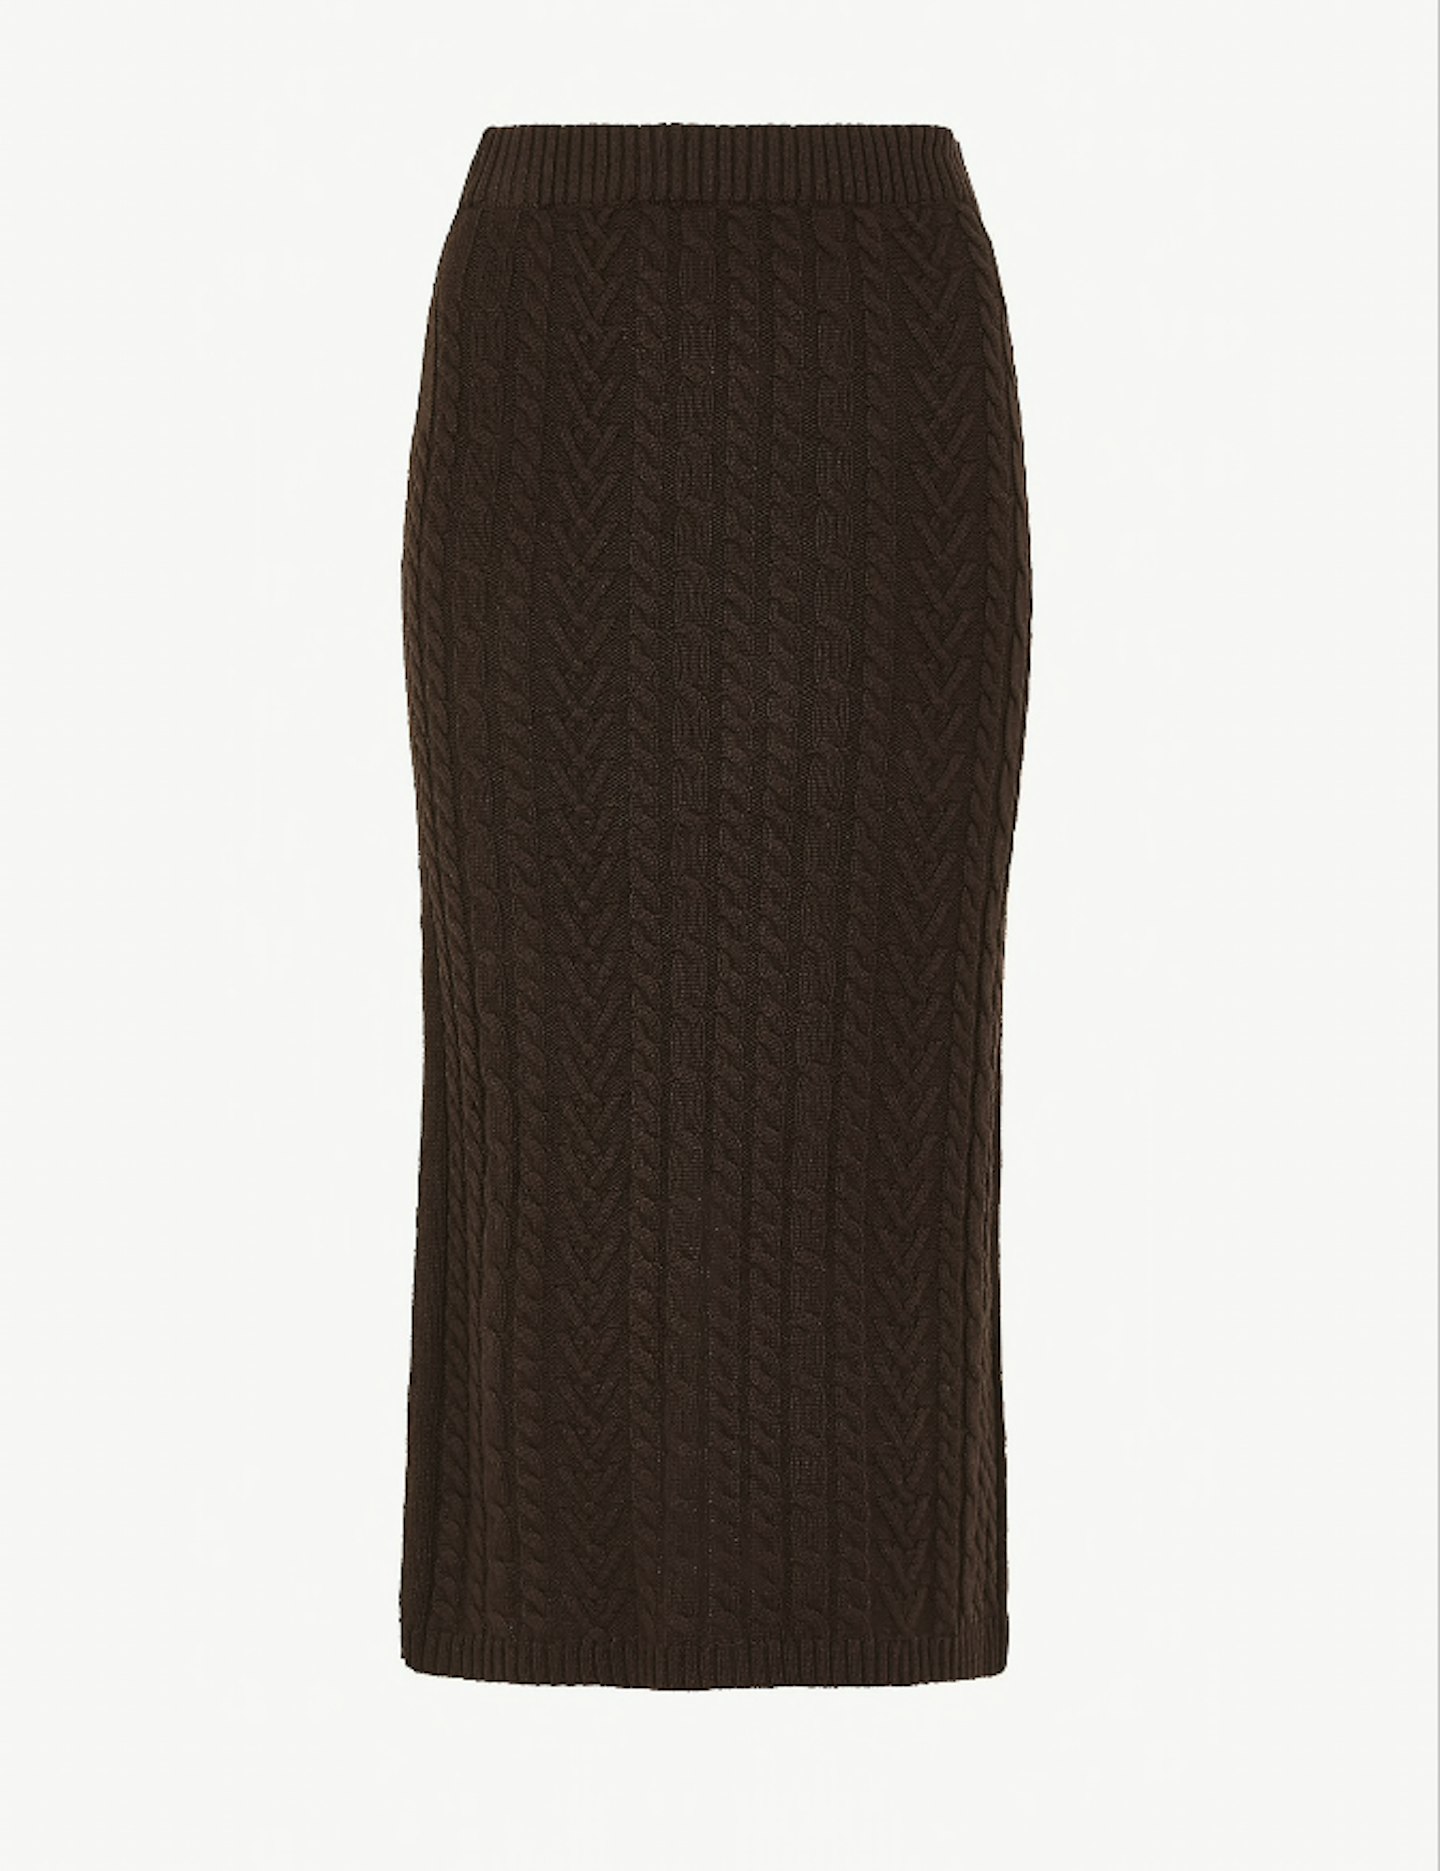 M&S Collection, Knitted Midi Skirt, £35